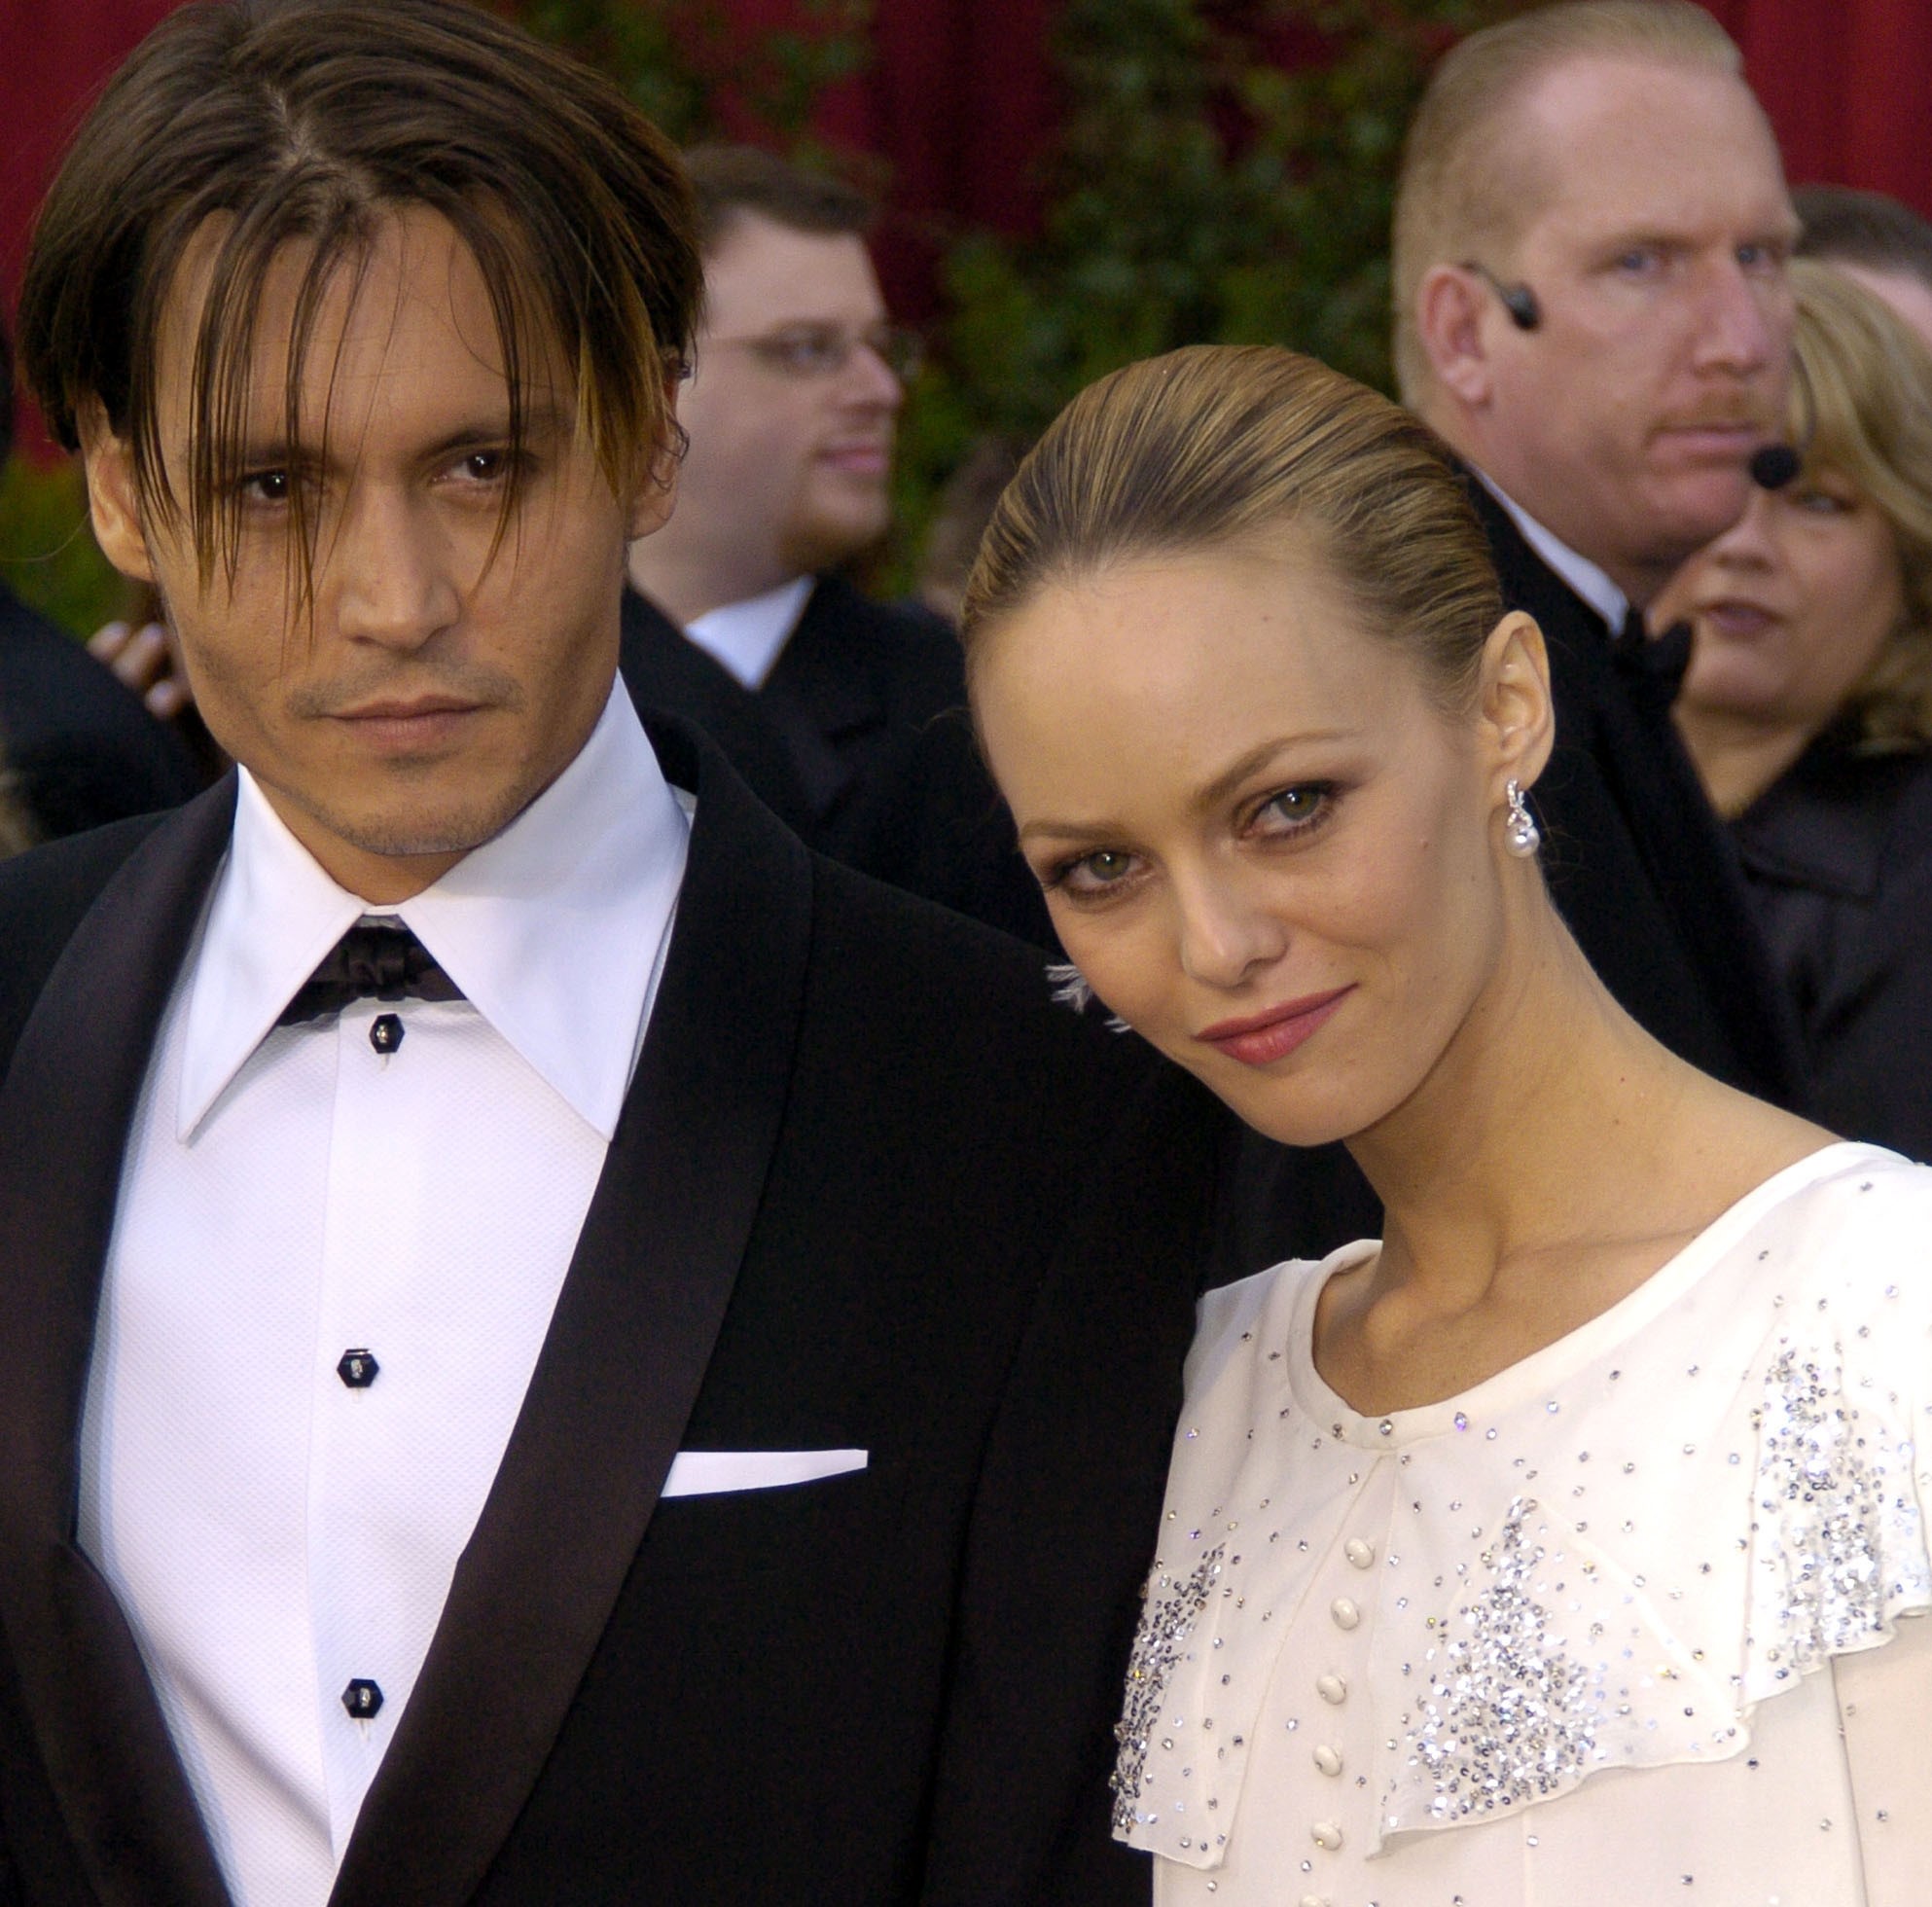 Johnny Depp and Vanessa Paradis at The 76th Annual Academy Awards - Arrivals, Kodak Theatre, Hollywood, California | Source: Getty Images